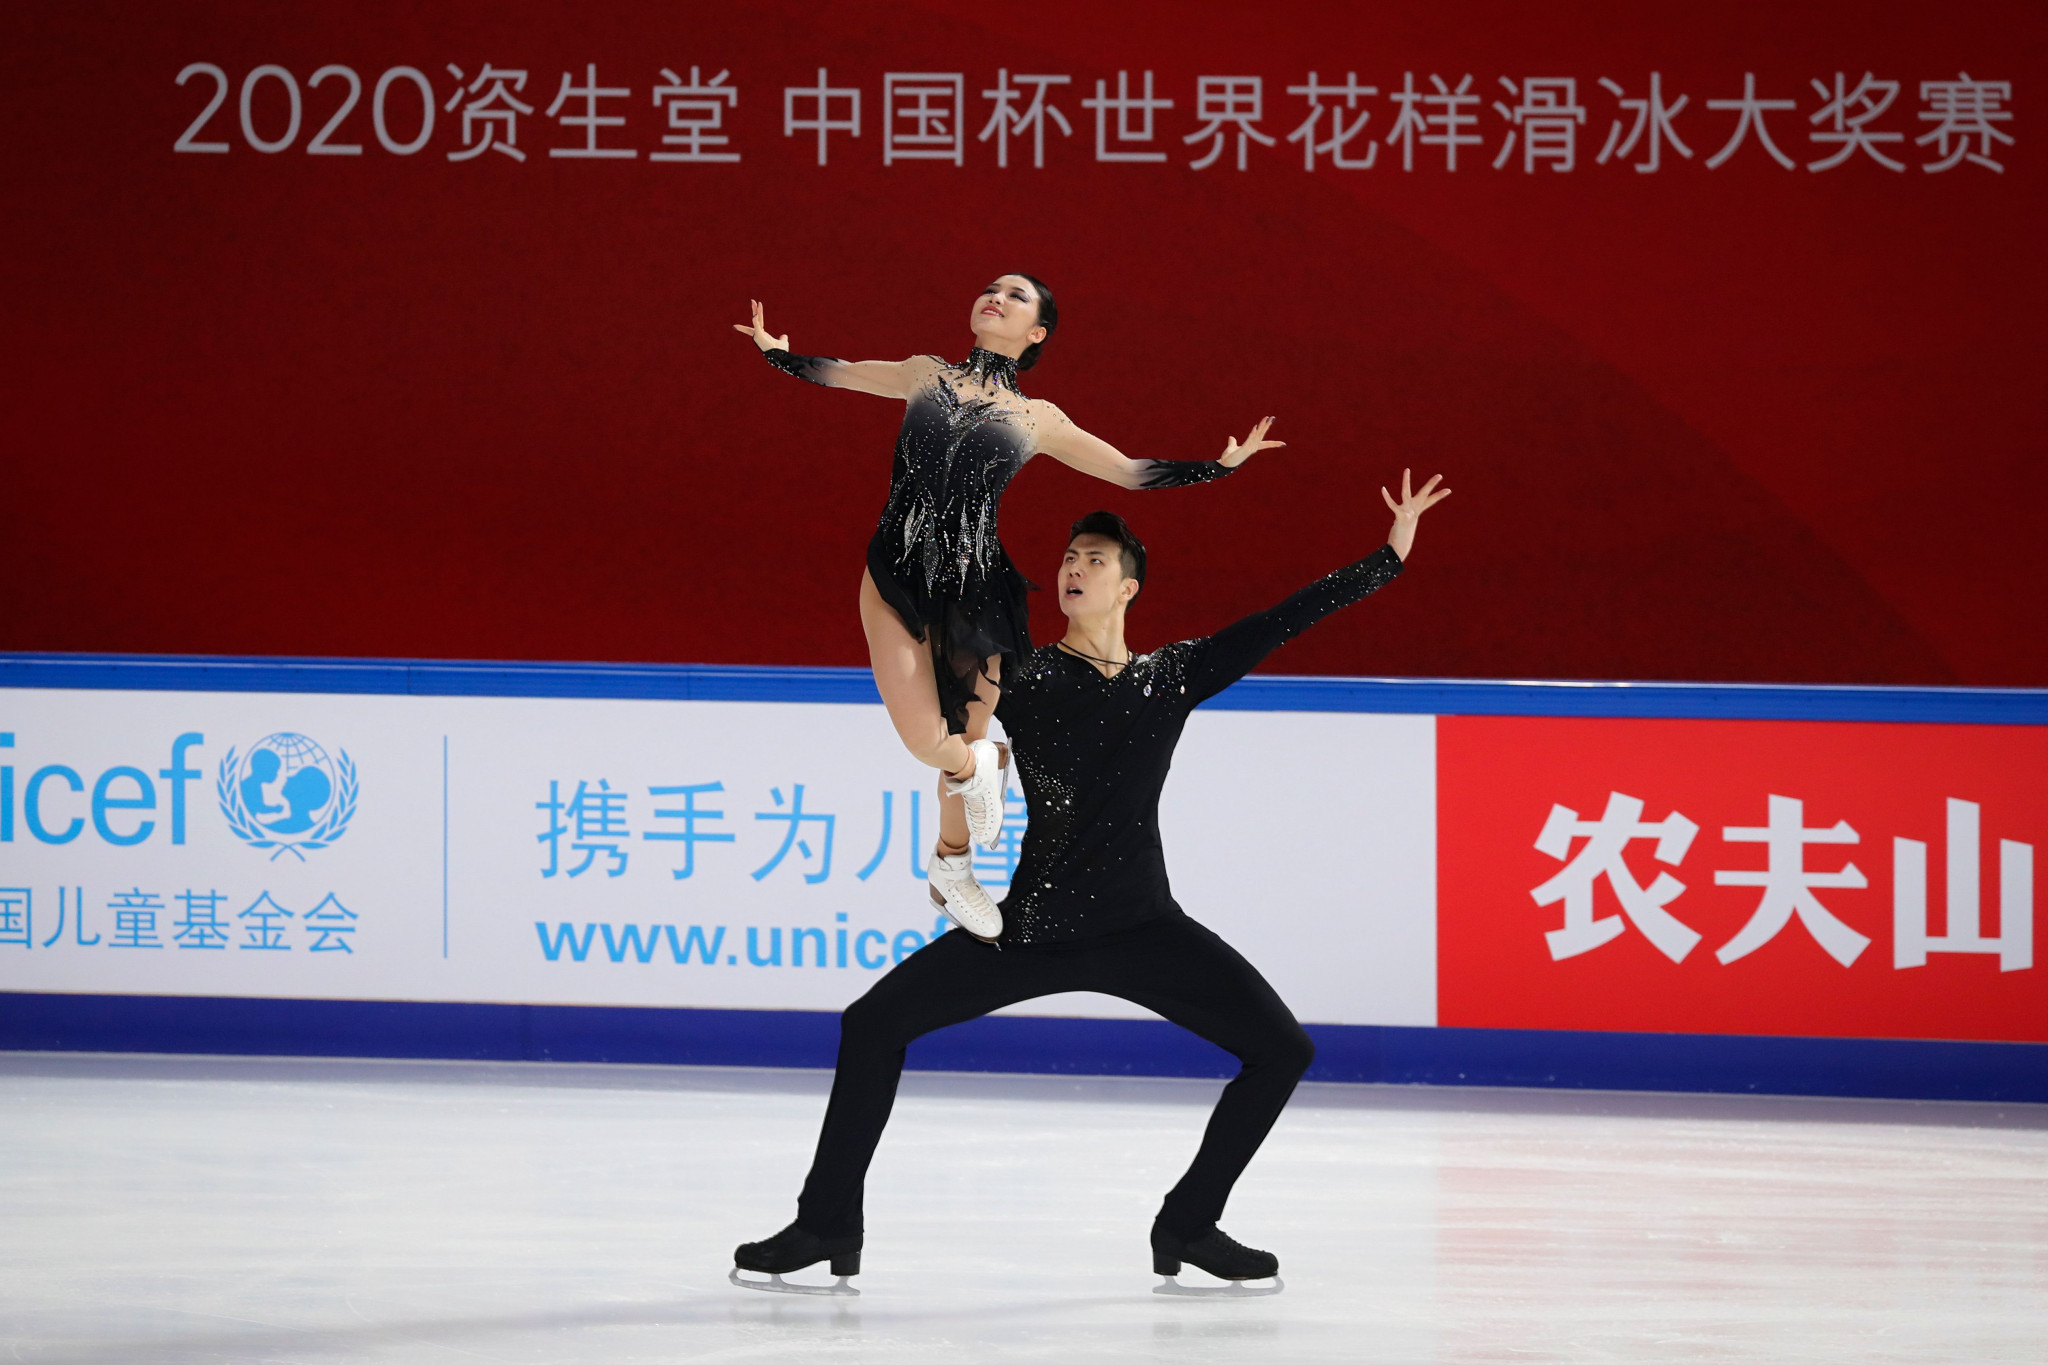 Wang Shiyue, left, and Liu Xinyu won the ice dance gold medal at the 2020 Cup of China ©Getty Images